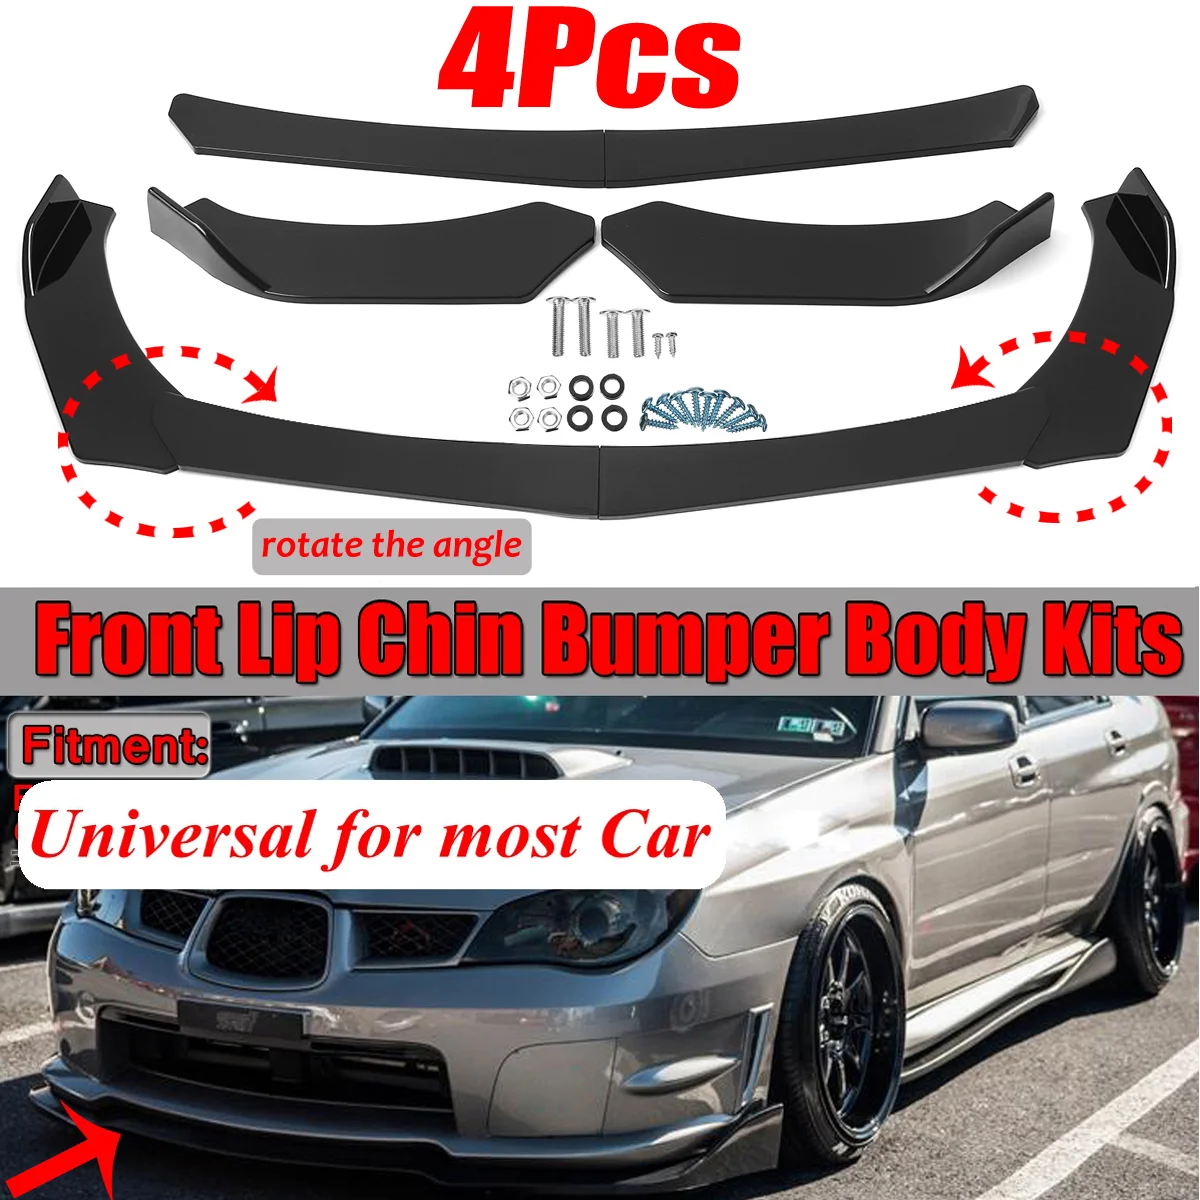 4PCS Universal Car Front Bumper Splitter Lip Diffuser Chin Bumper Body Kits For Benz For BMW For Honda For Ford For Audi